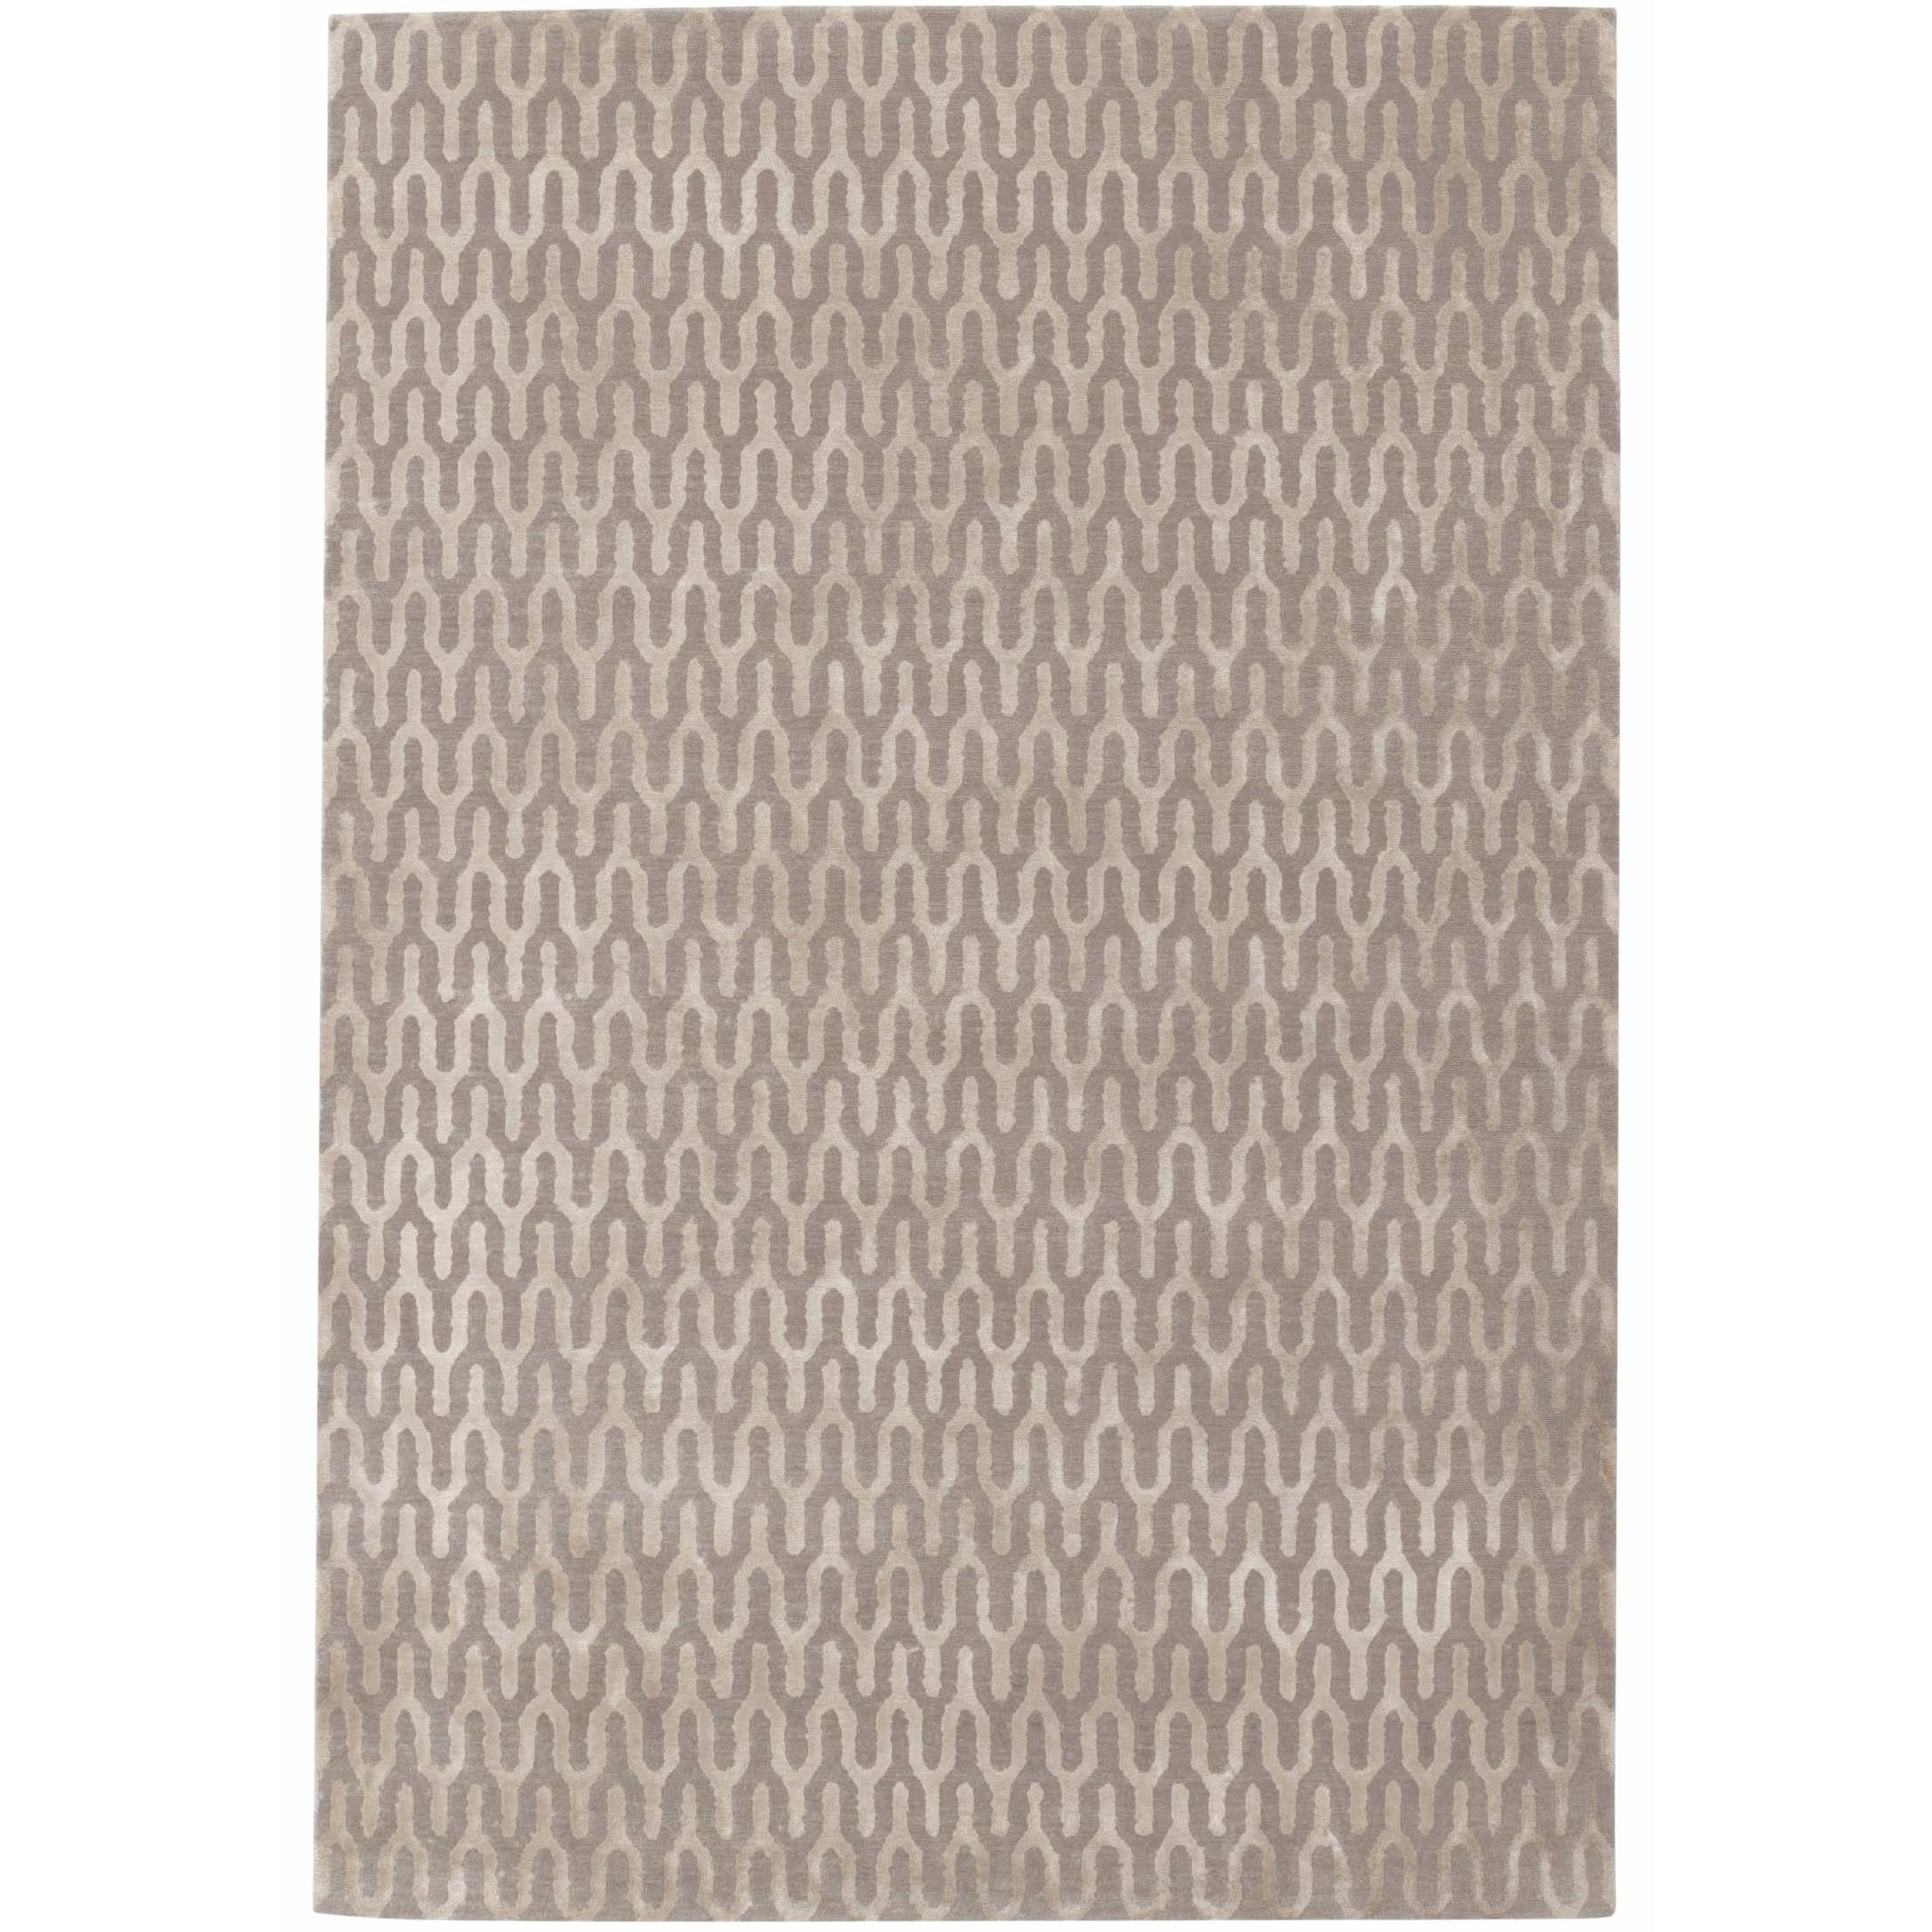 Ponti Silk Hand-Knotted 10x8 Rug in Wool and Silk by Suzanne Sharp